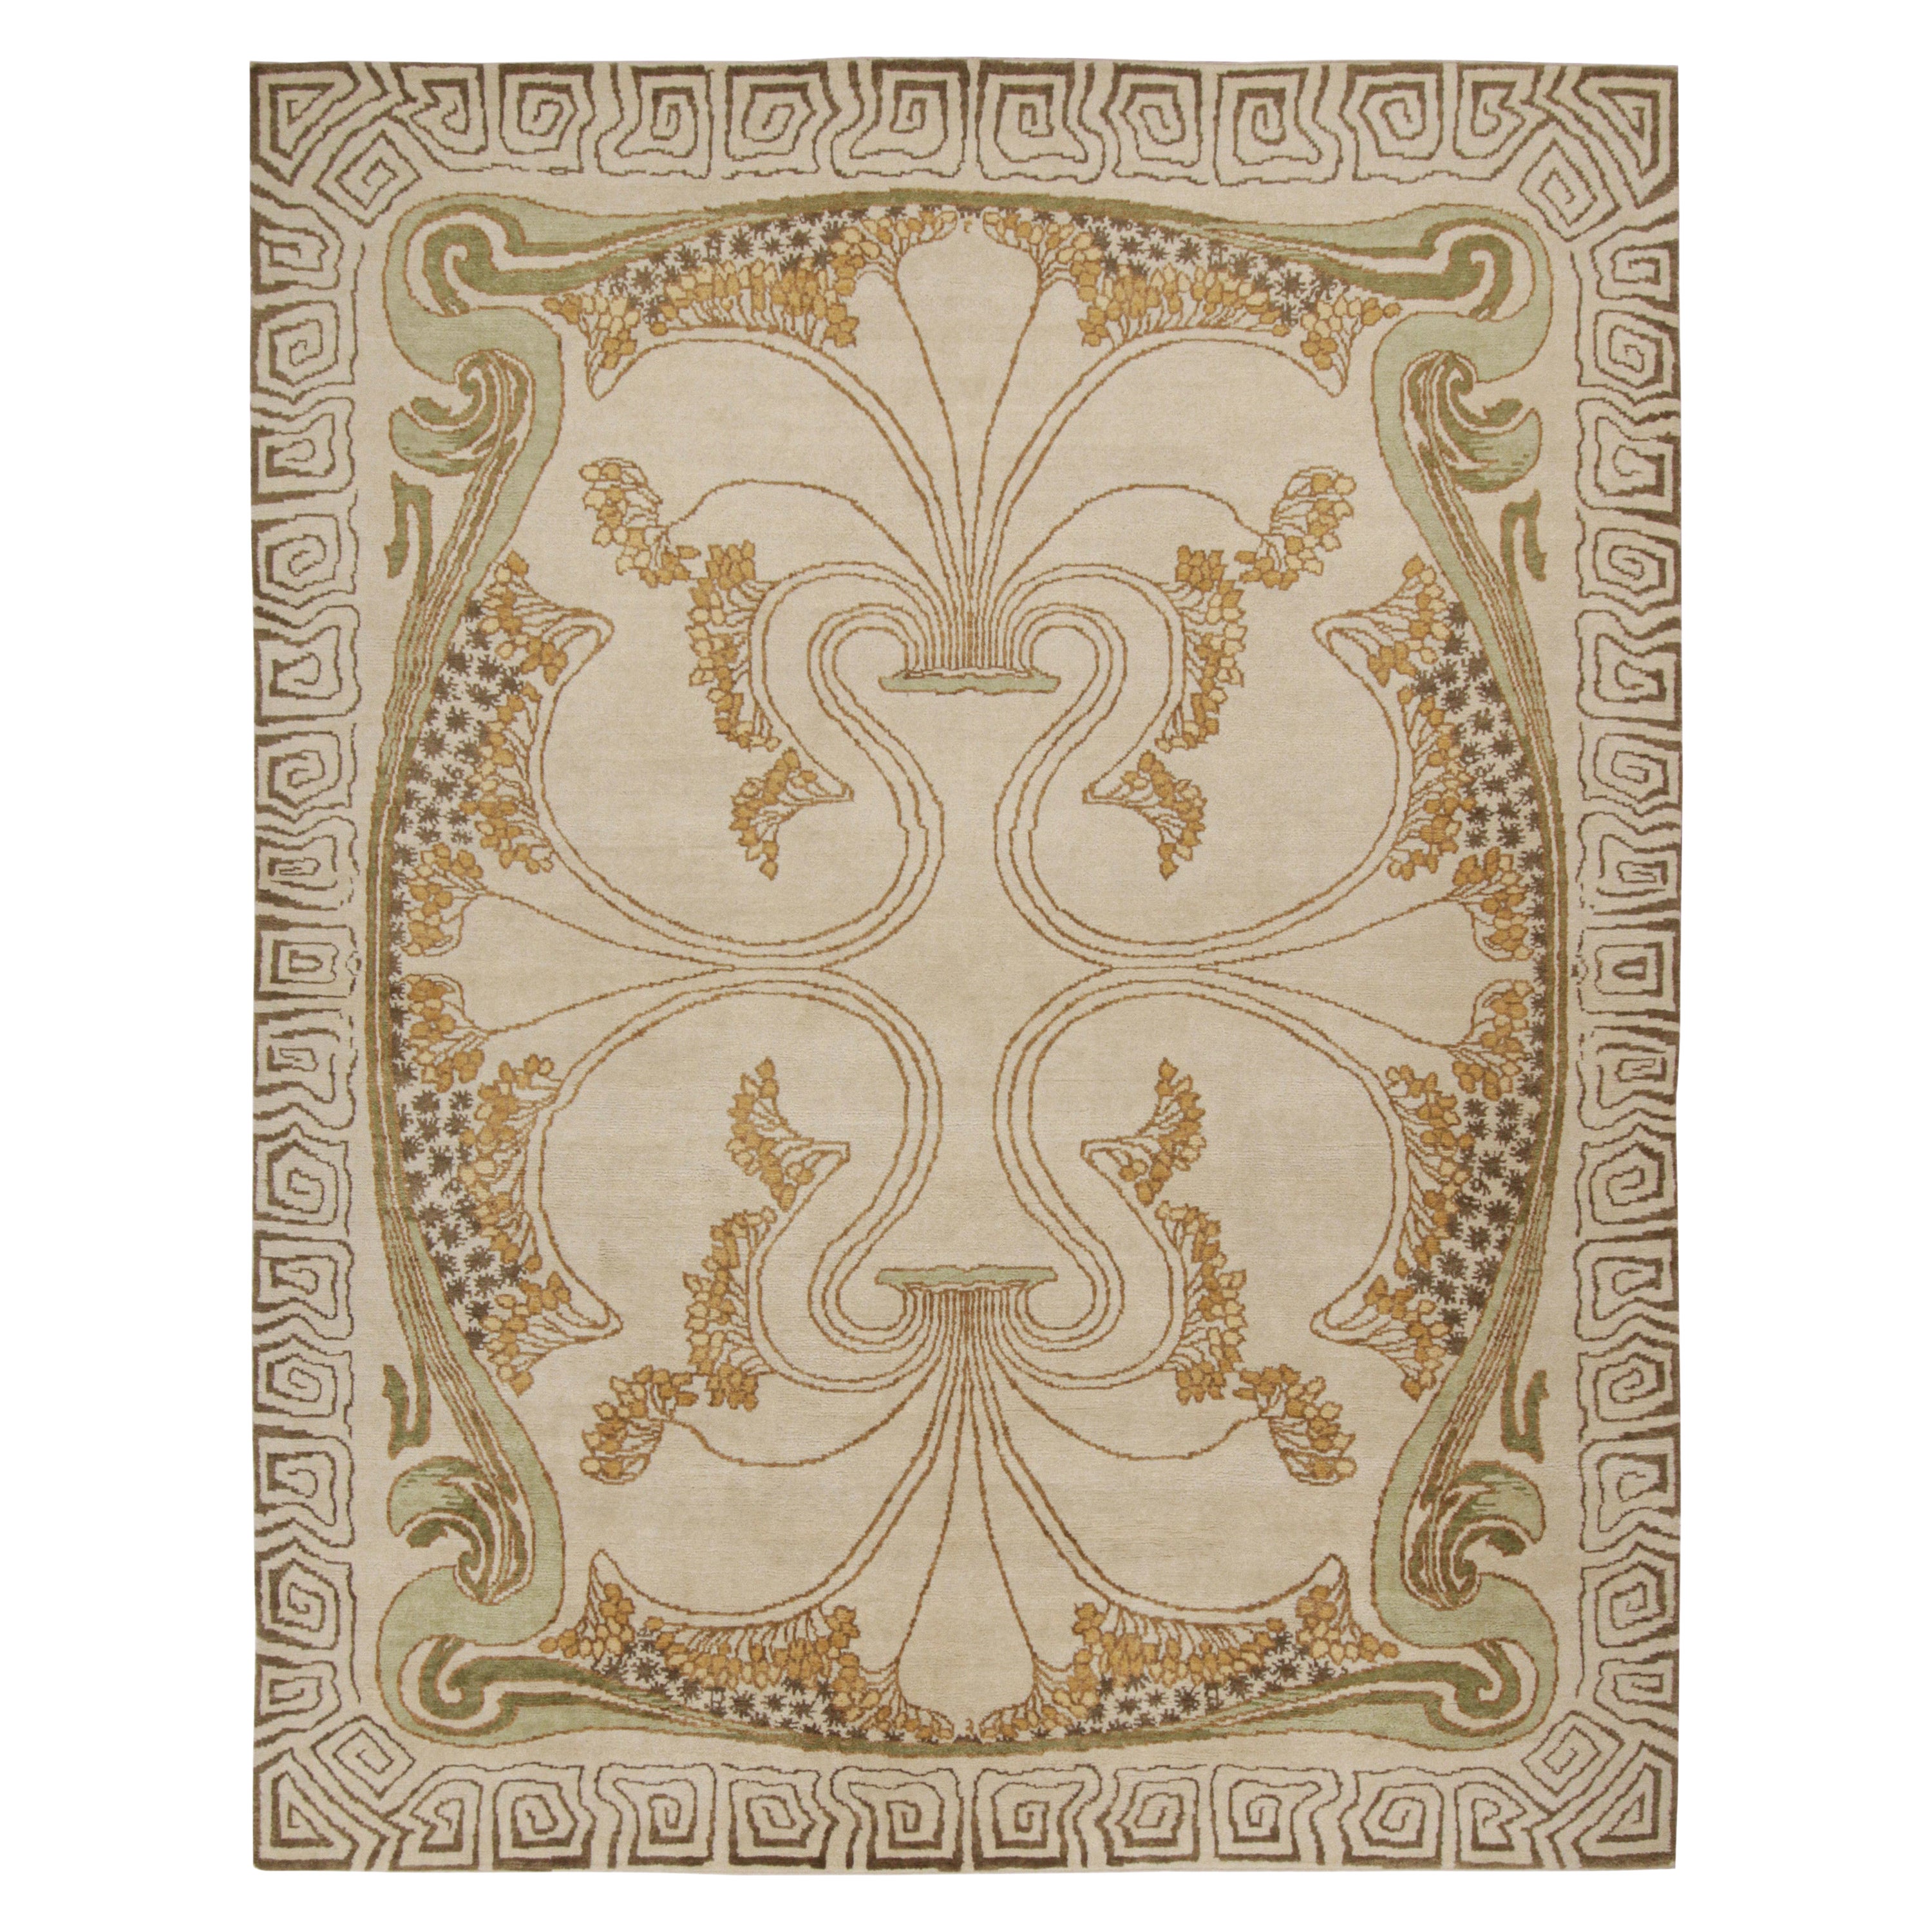 Rug & Kilim’s French Style Art Deco Rug in Cream & Gold Geometric Patterns